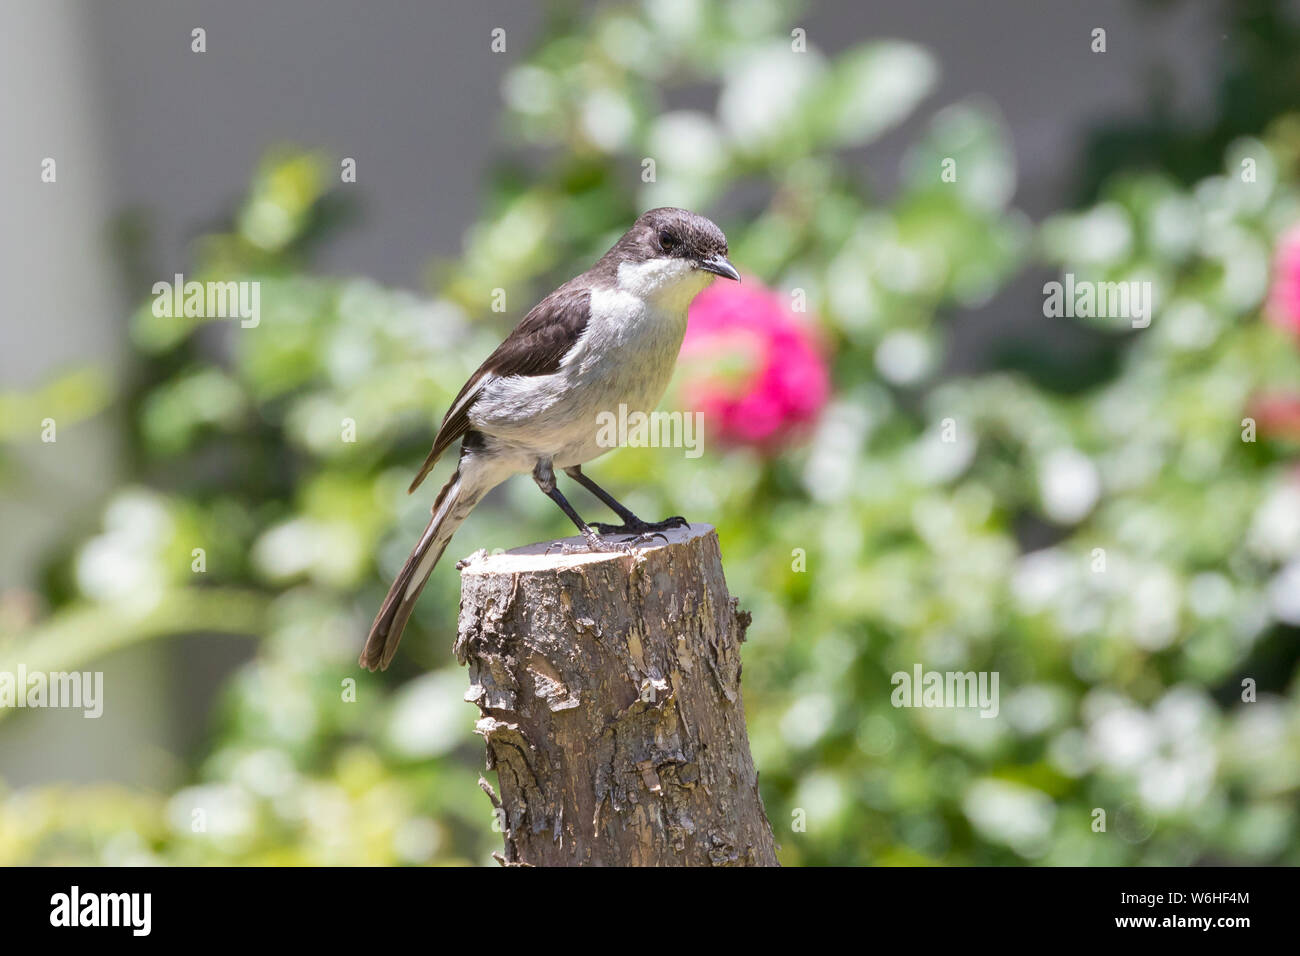 Fiscal Flycatcher (Sigelus silens) perched on a small tree stump in a garden in summer, Western Cape, South Africa Stock Photo